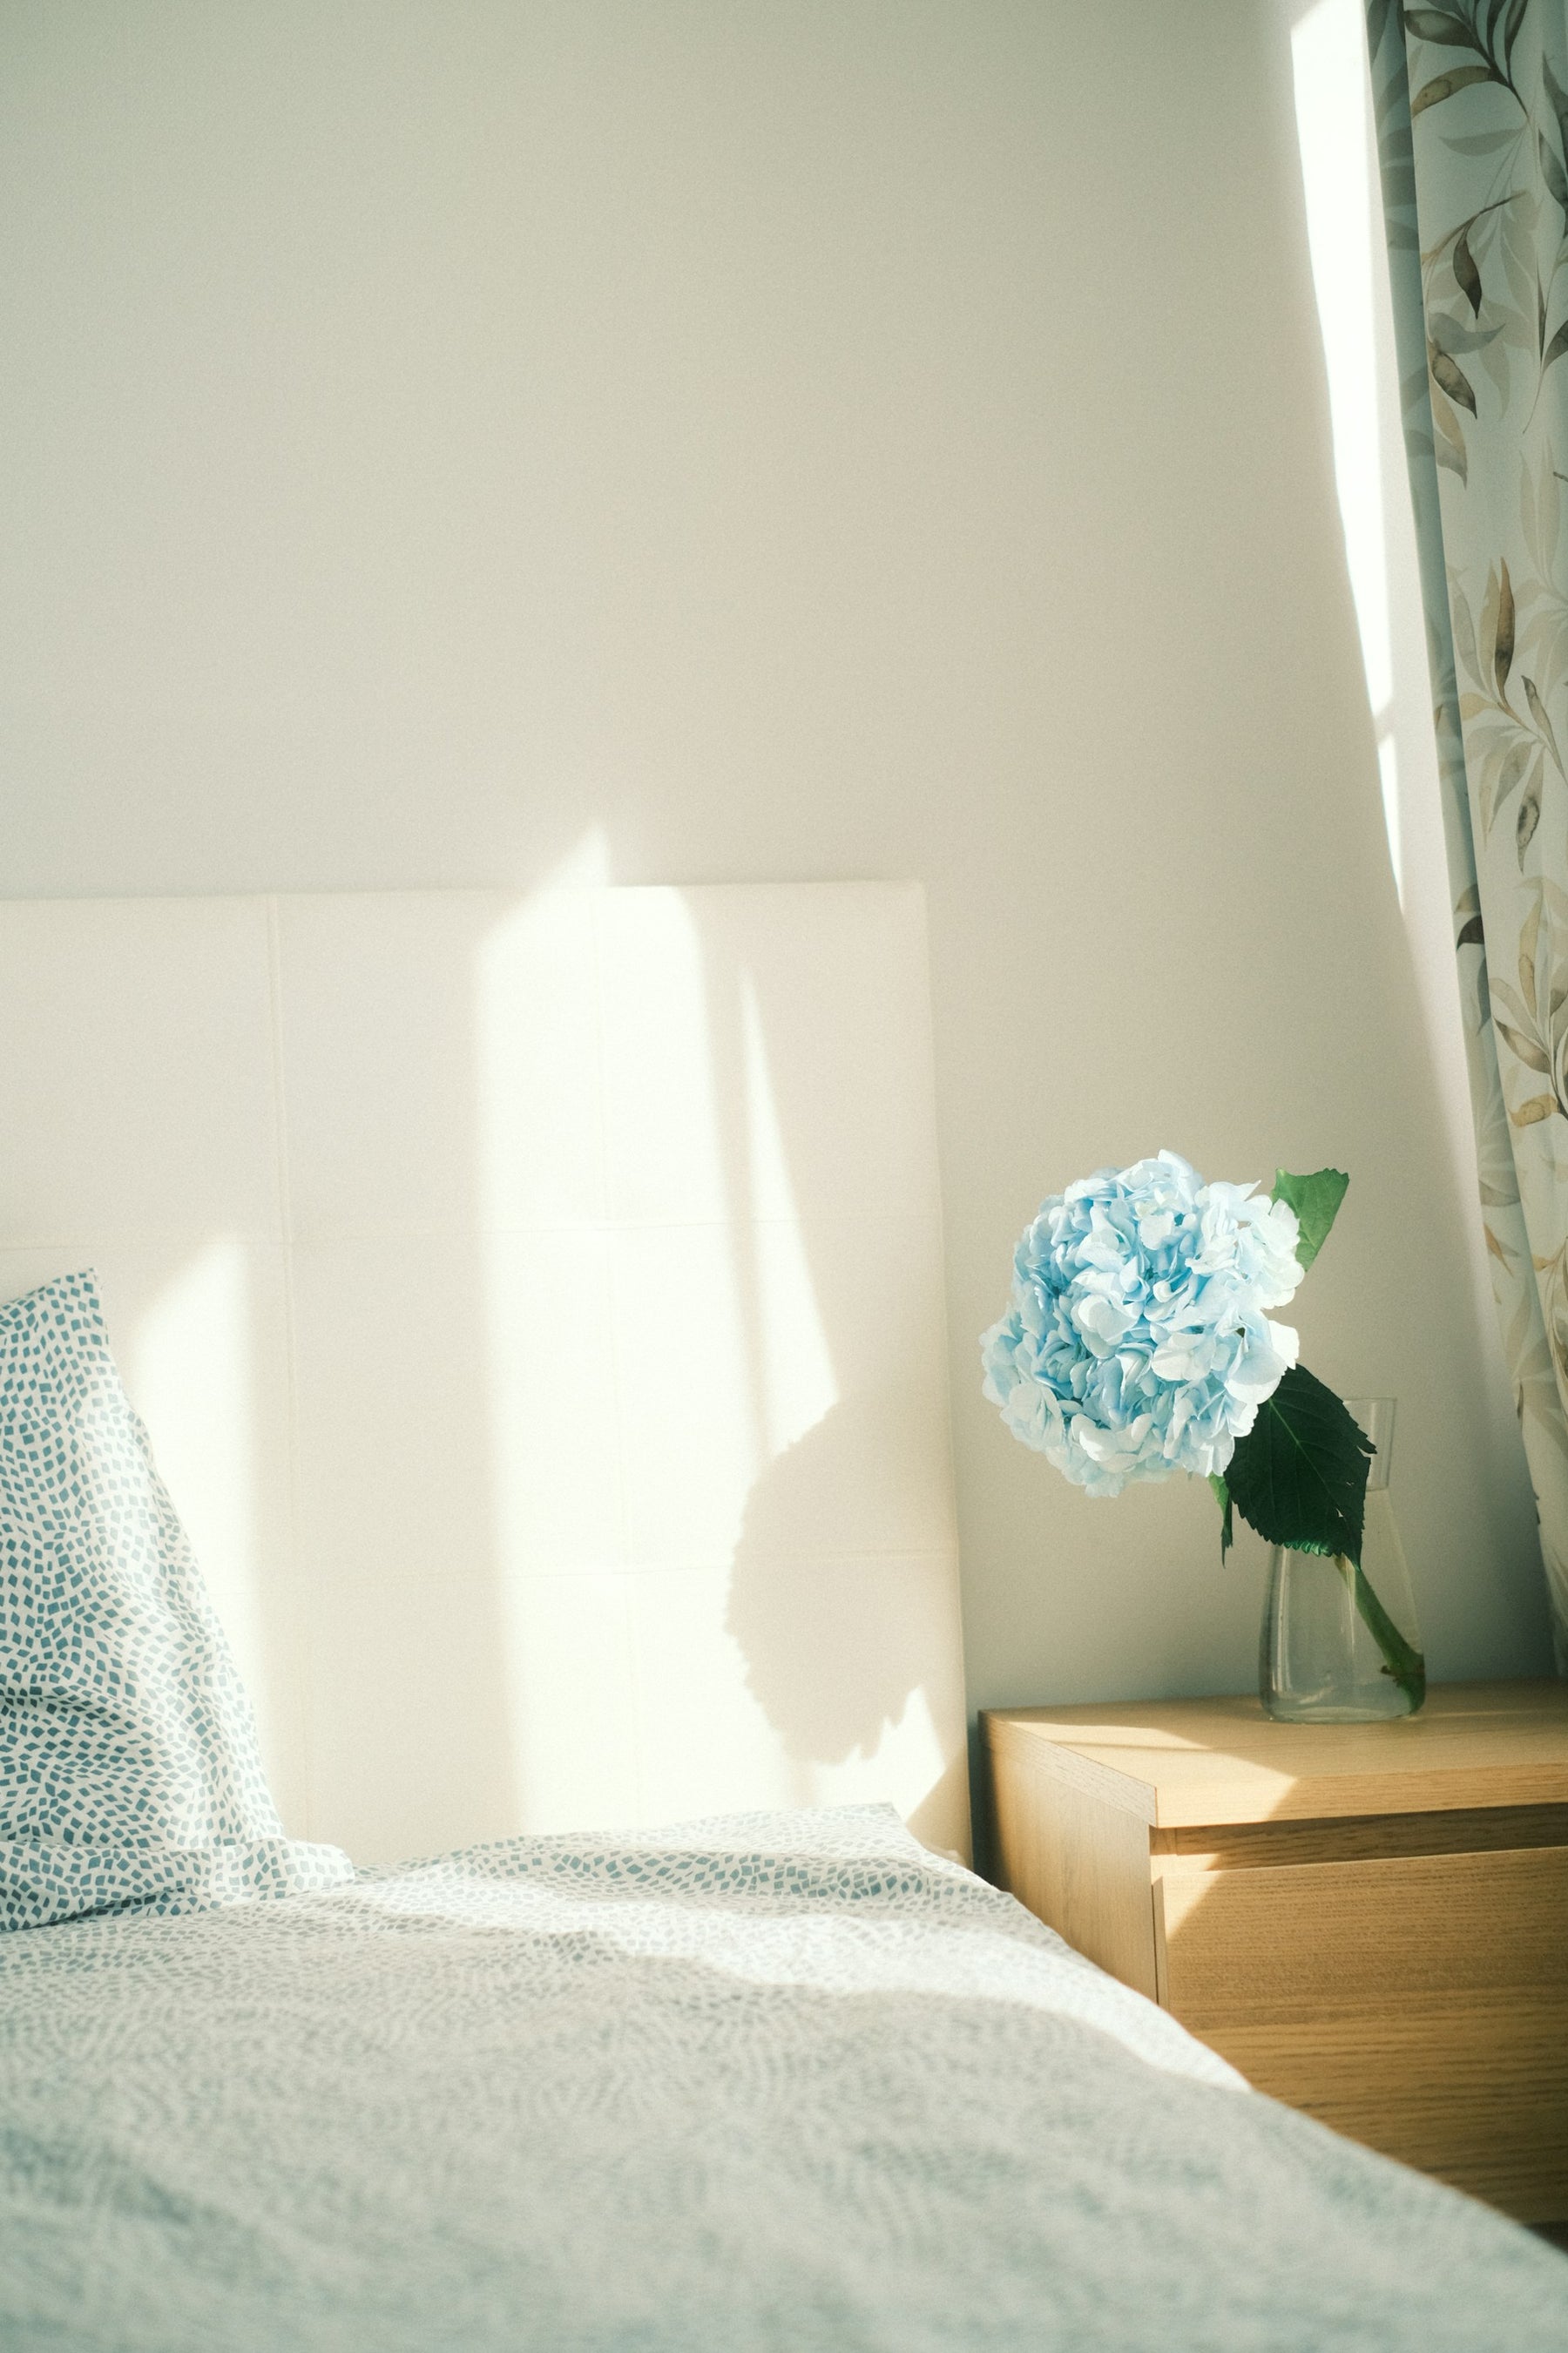 Skylight in the Bedroom: How It Can Improve Sleep Quality